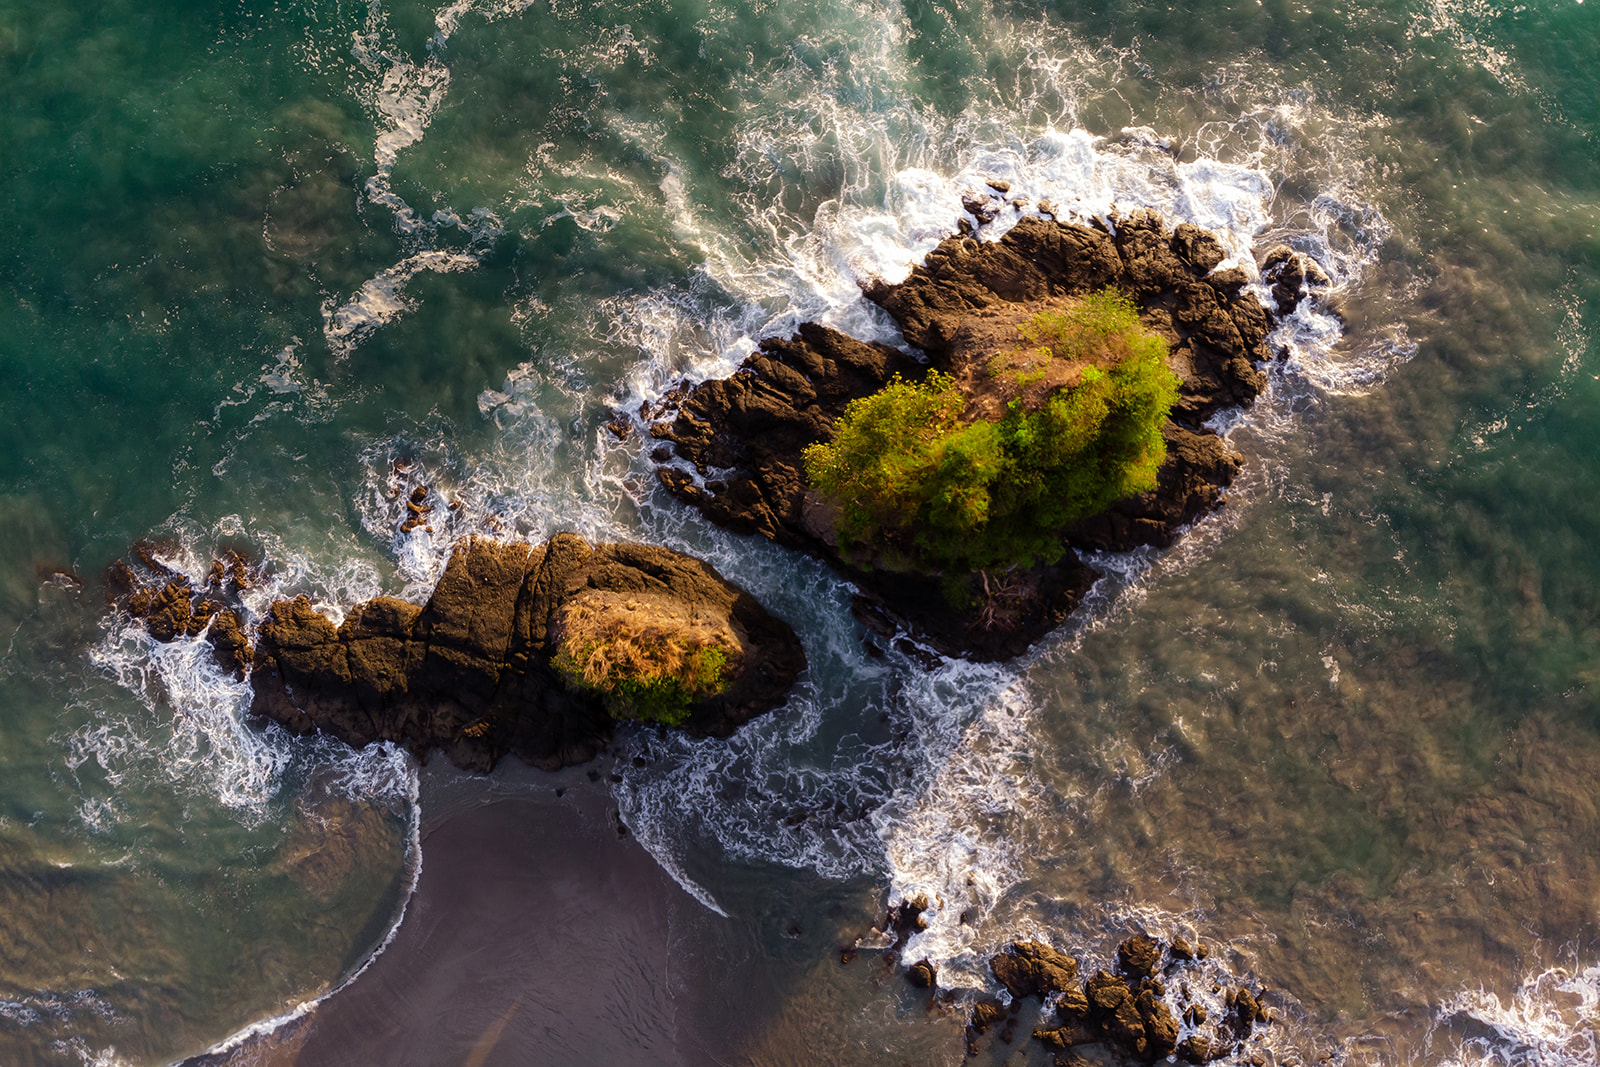 Drone shot of rocks from above